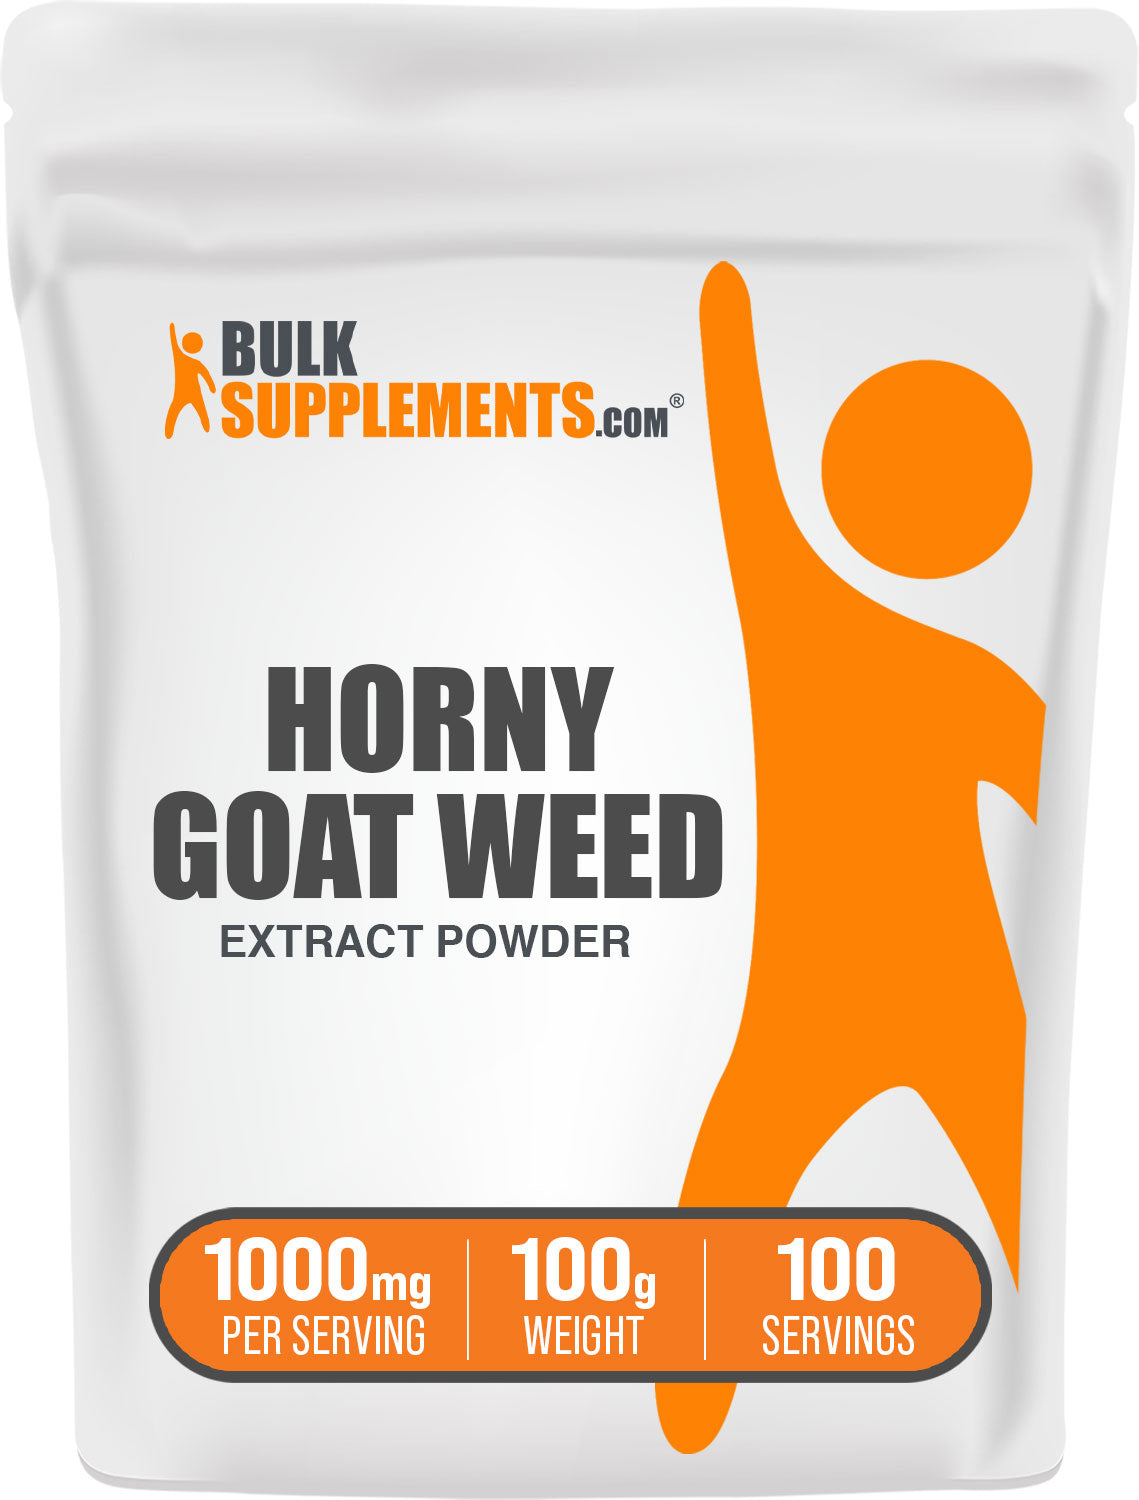 BulkSupplements.com Horny Goat Weed Extract Powder 100g bag